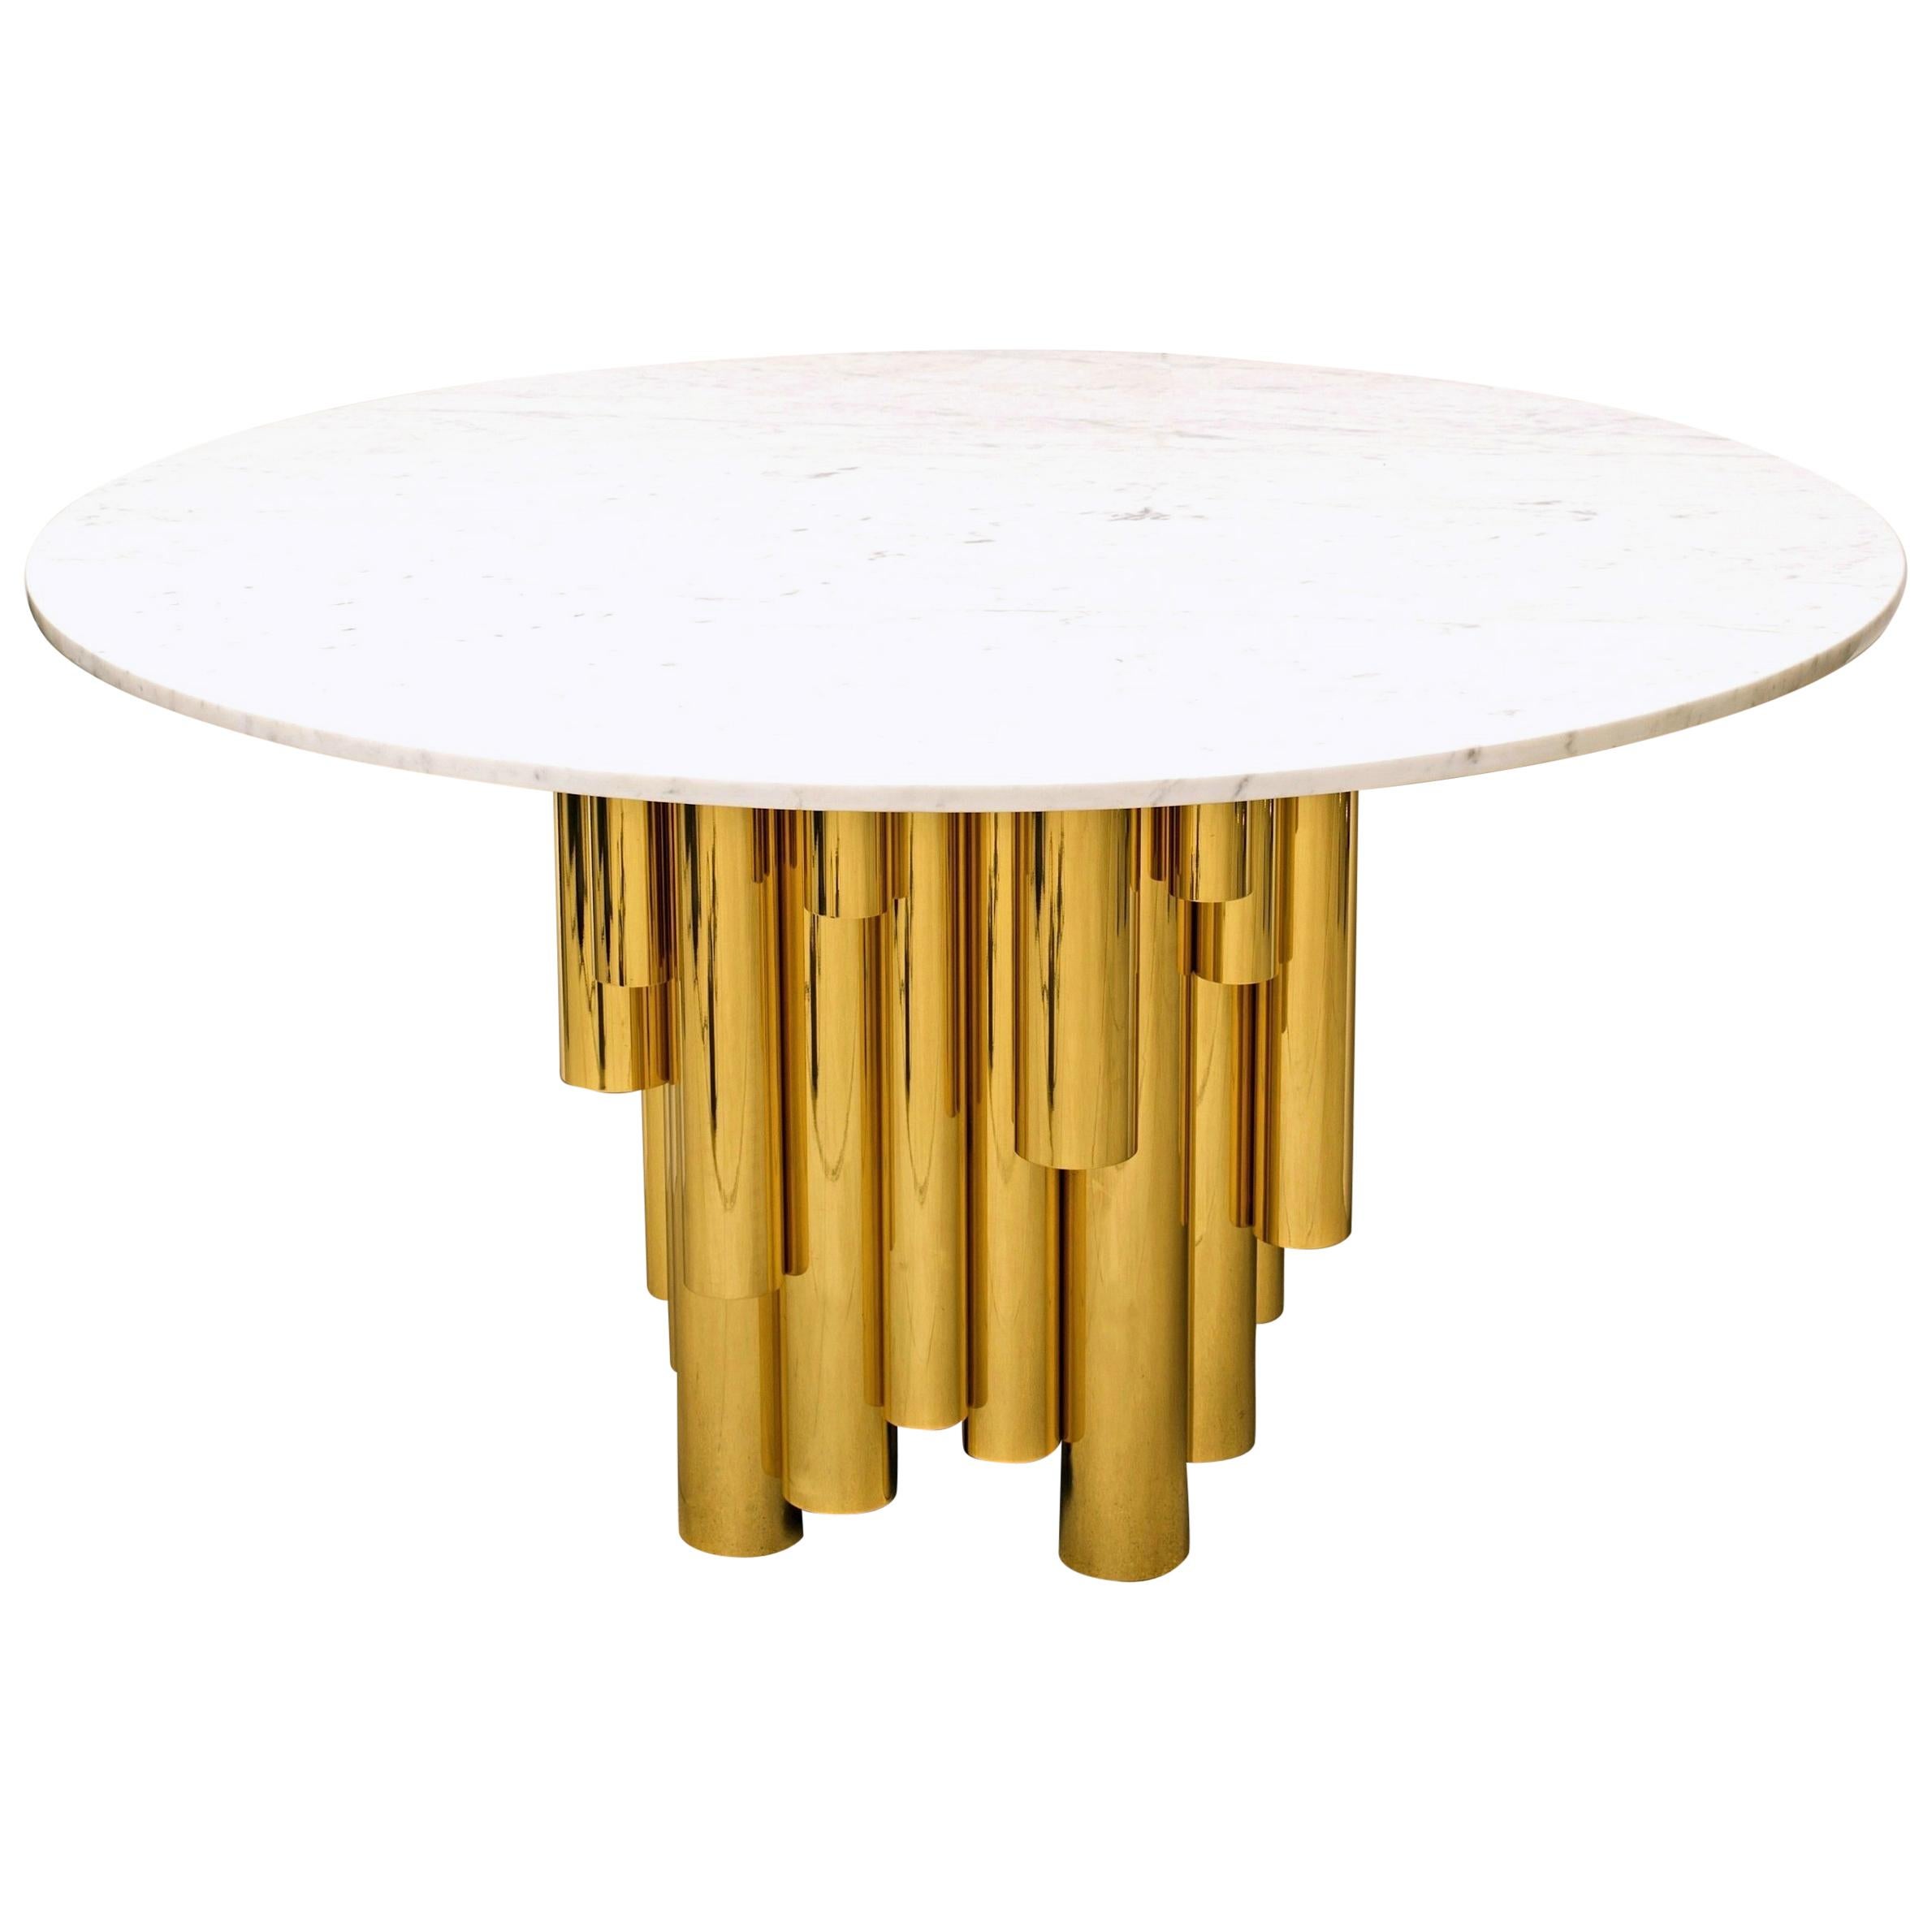 Contemporary Round Marble-Top Table with Brass Tubular Base